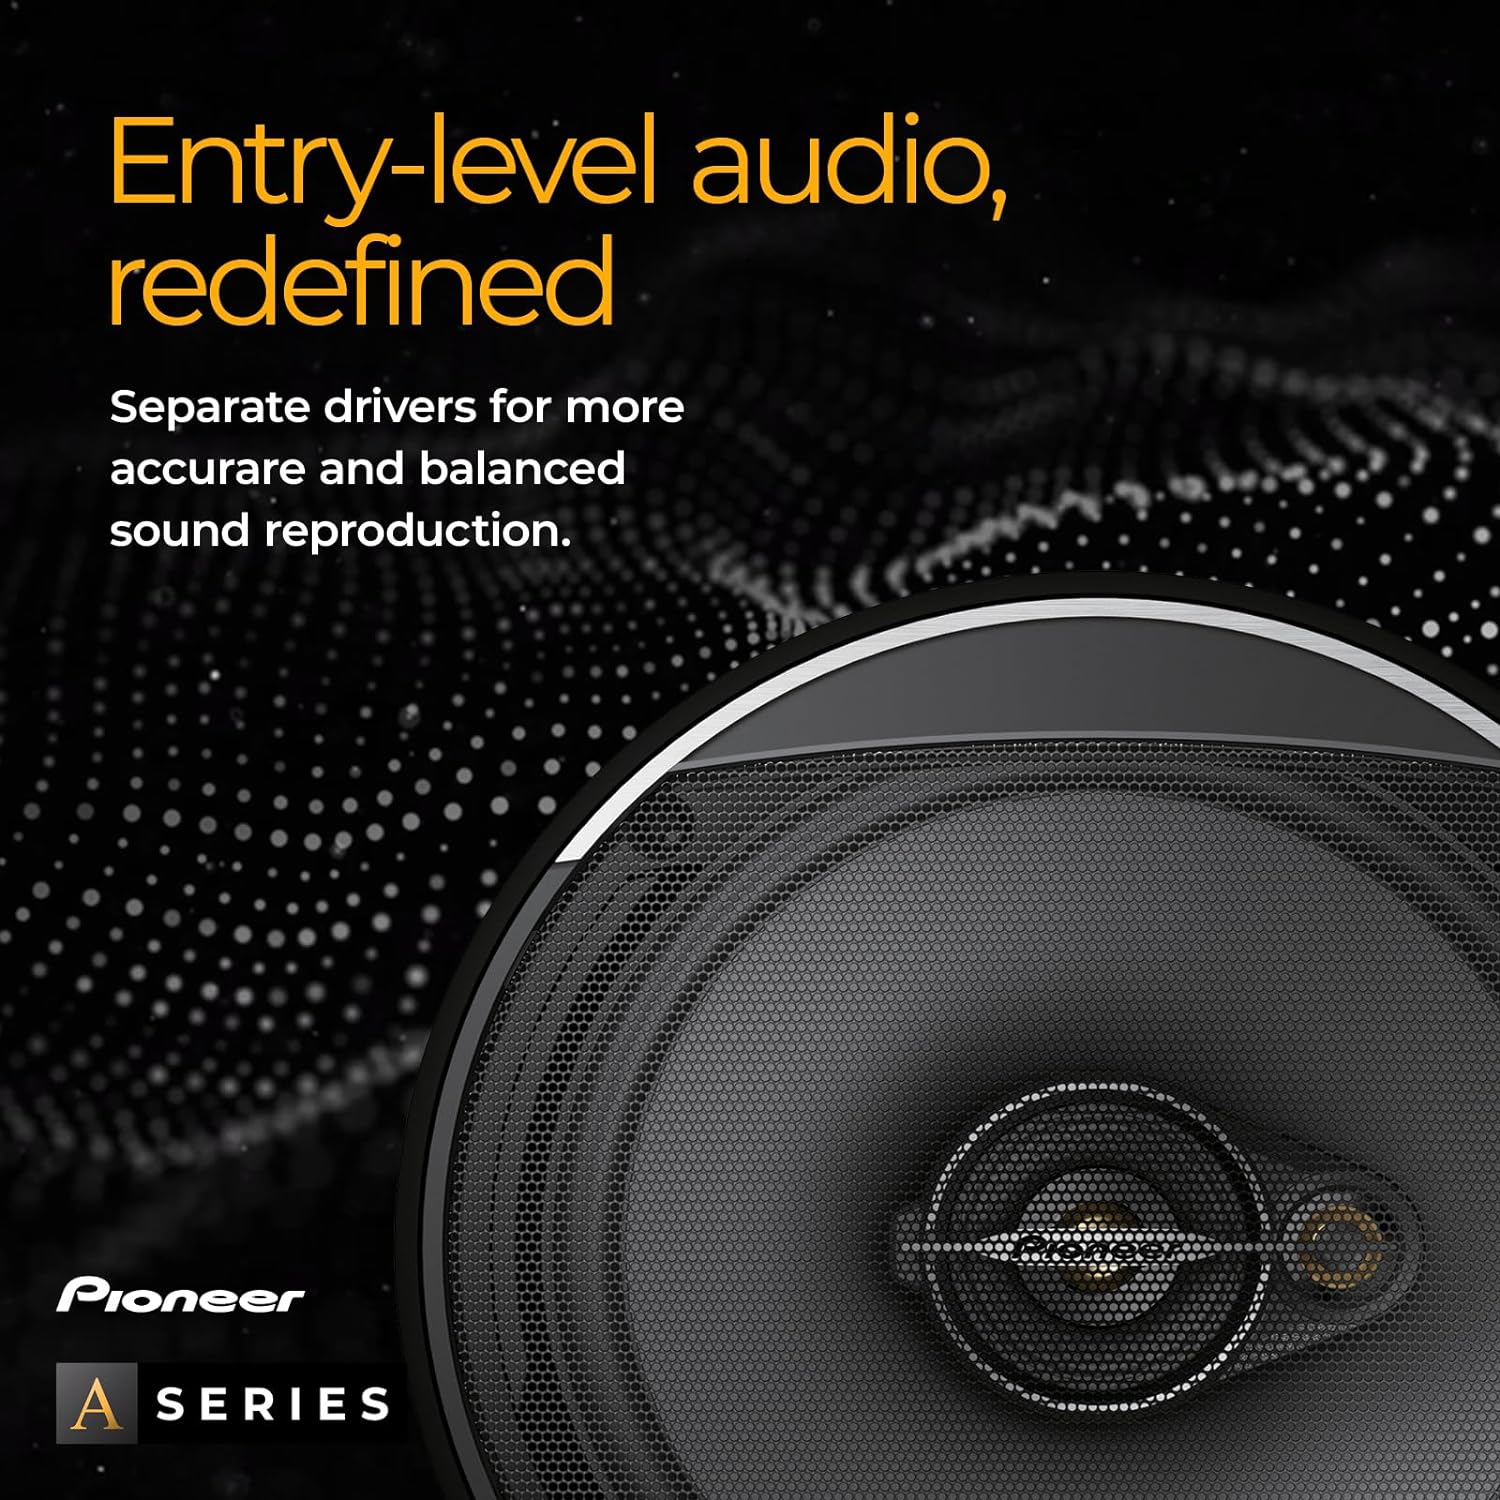 Pioneer A-Series Standard TS-A1371F, 3-Way Coaxial Car Audio Speakers, Full Range, Clear Sound Quality, Easy Installation and Enhanced Bass Response, Black and Gold Colored 5.25” Round Speakers